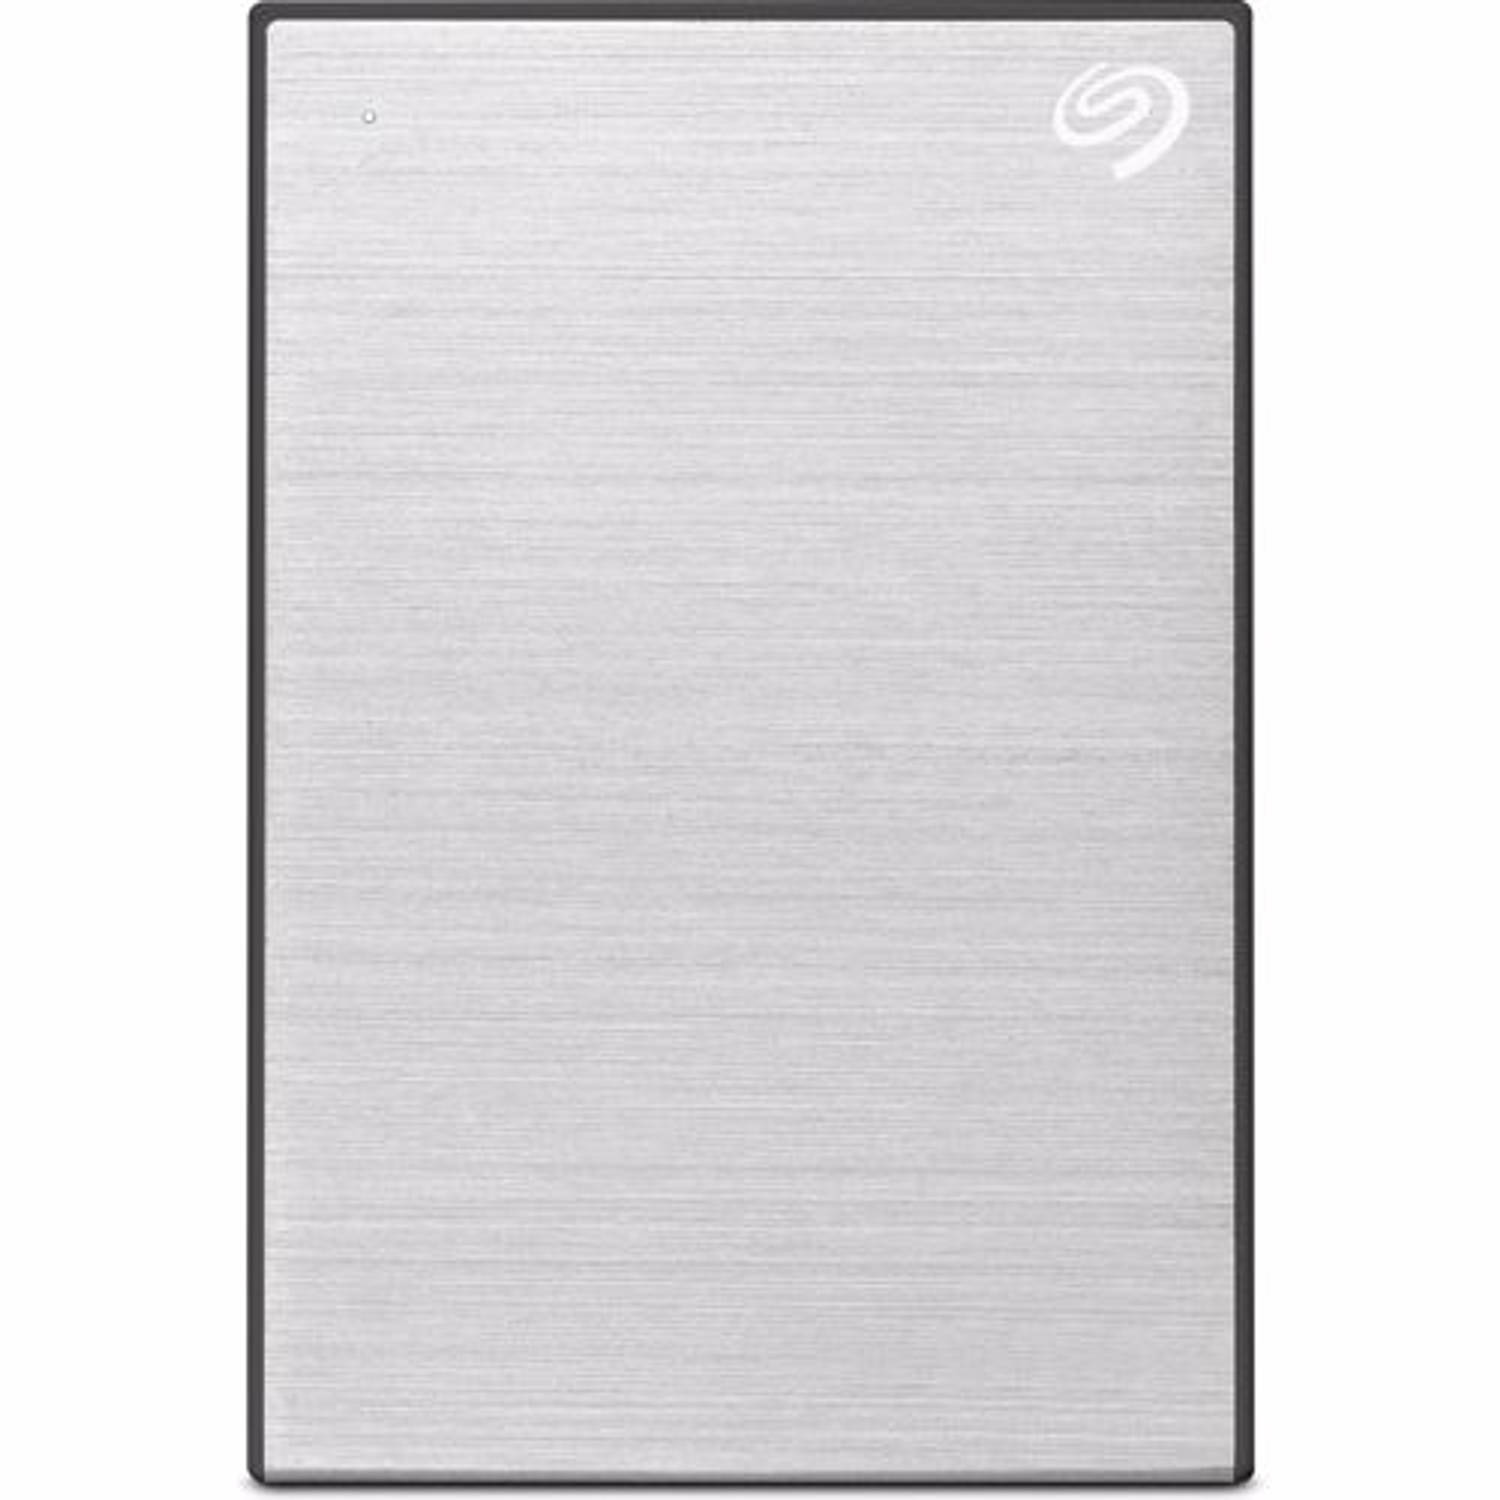 Seagate One Touch externe harde schijf 5000 GB Zilver